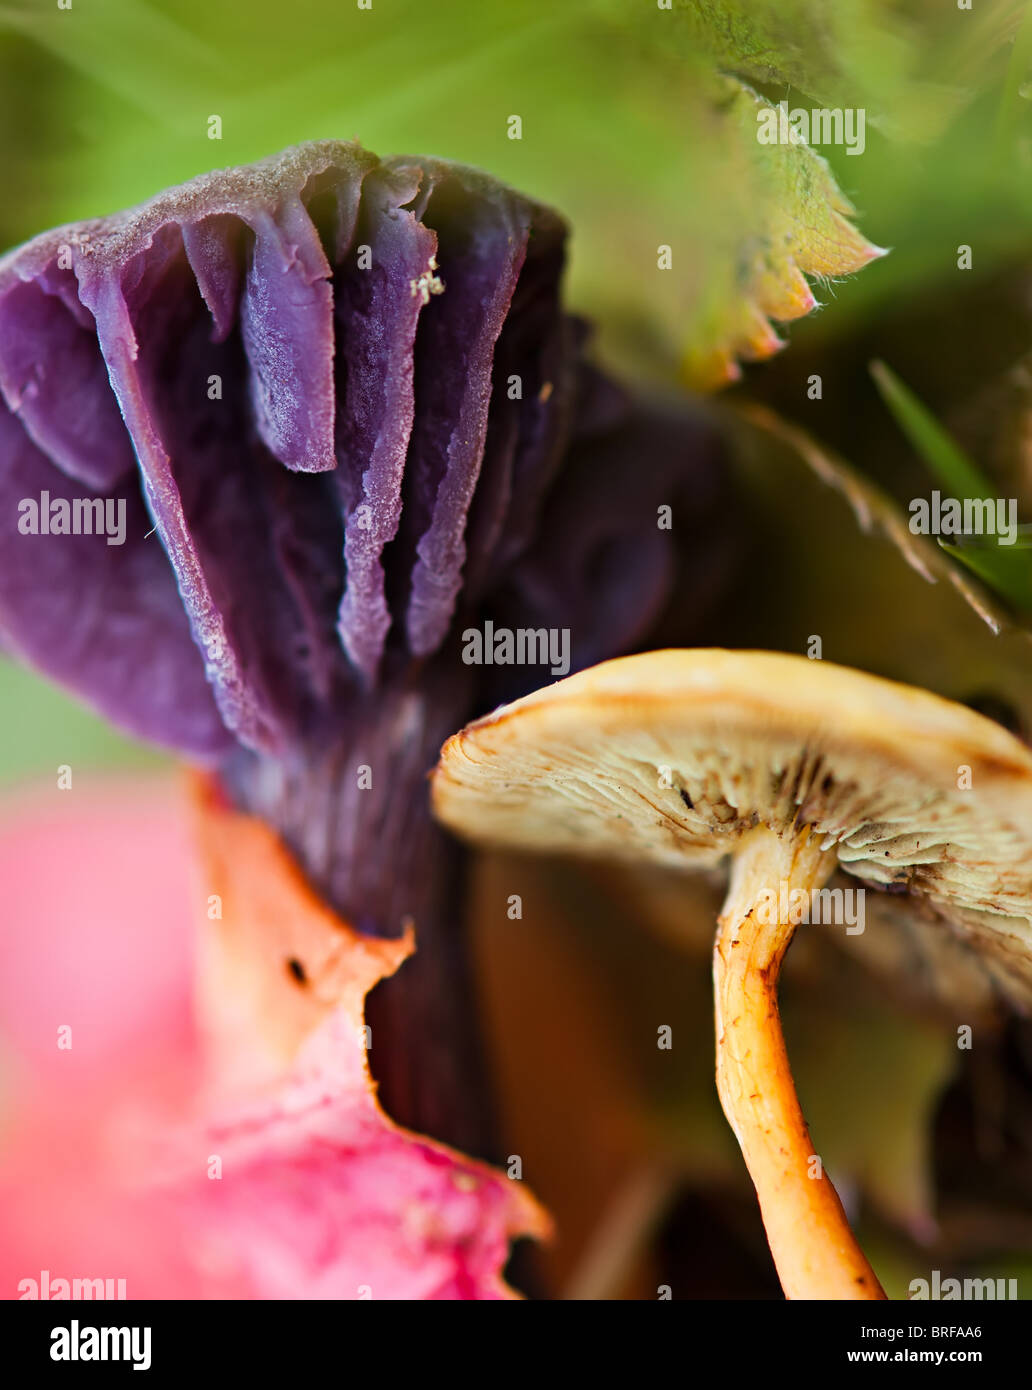 Poisonous mushroom in forest Stock Photo